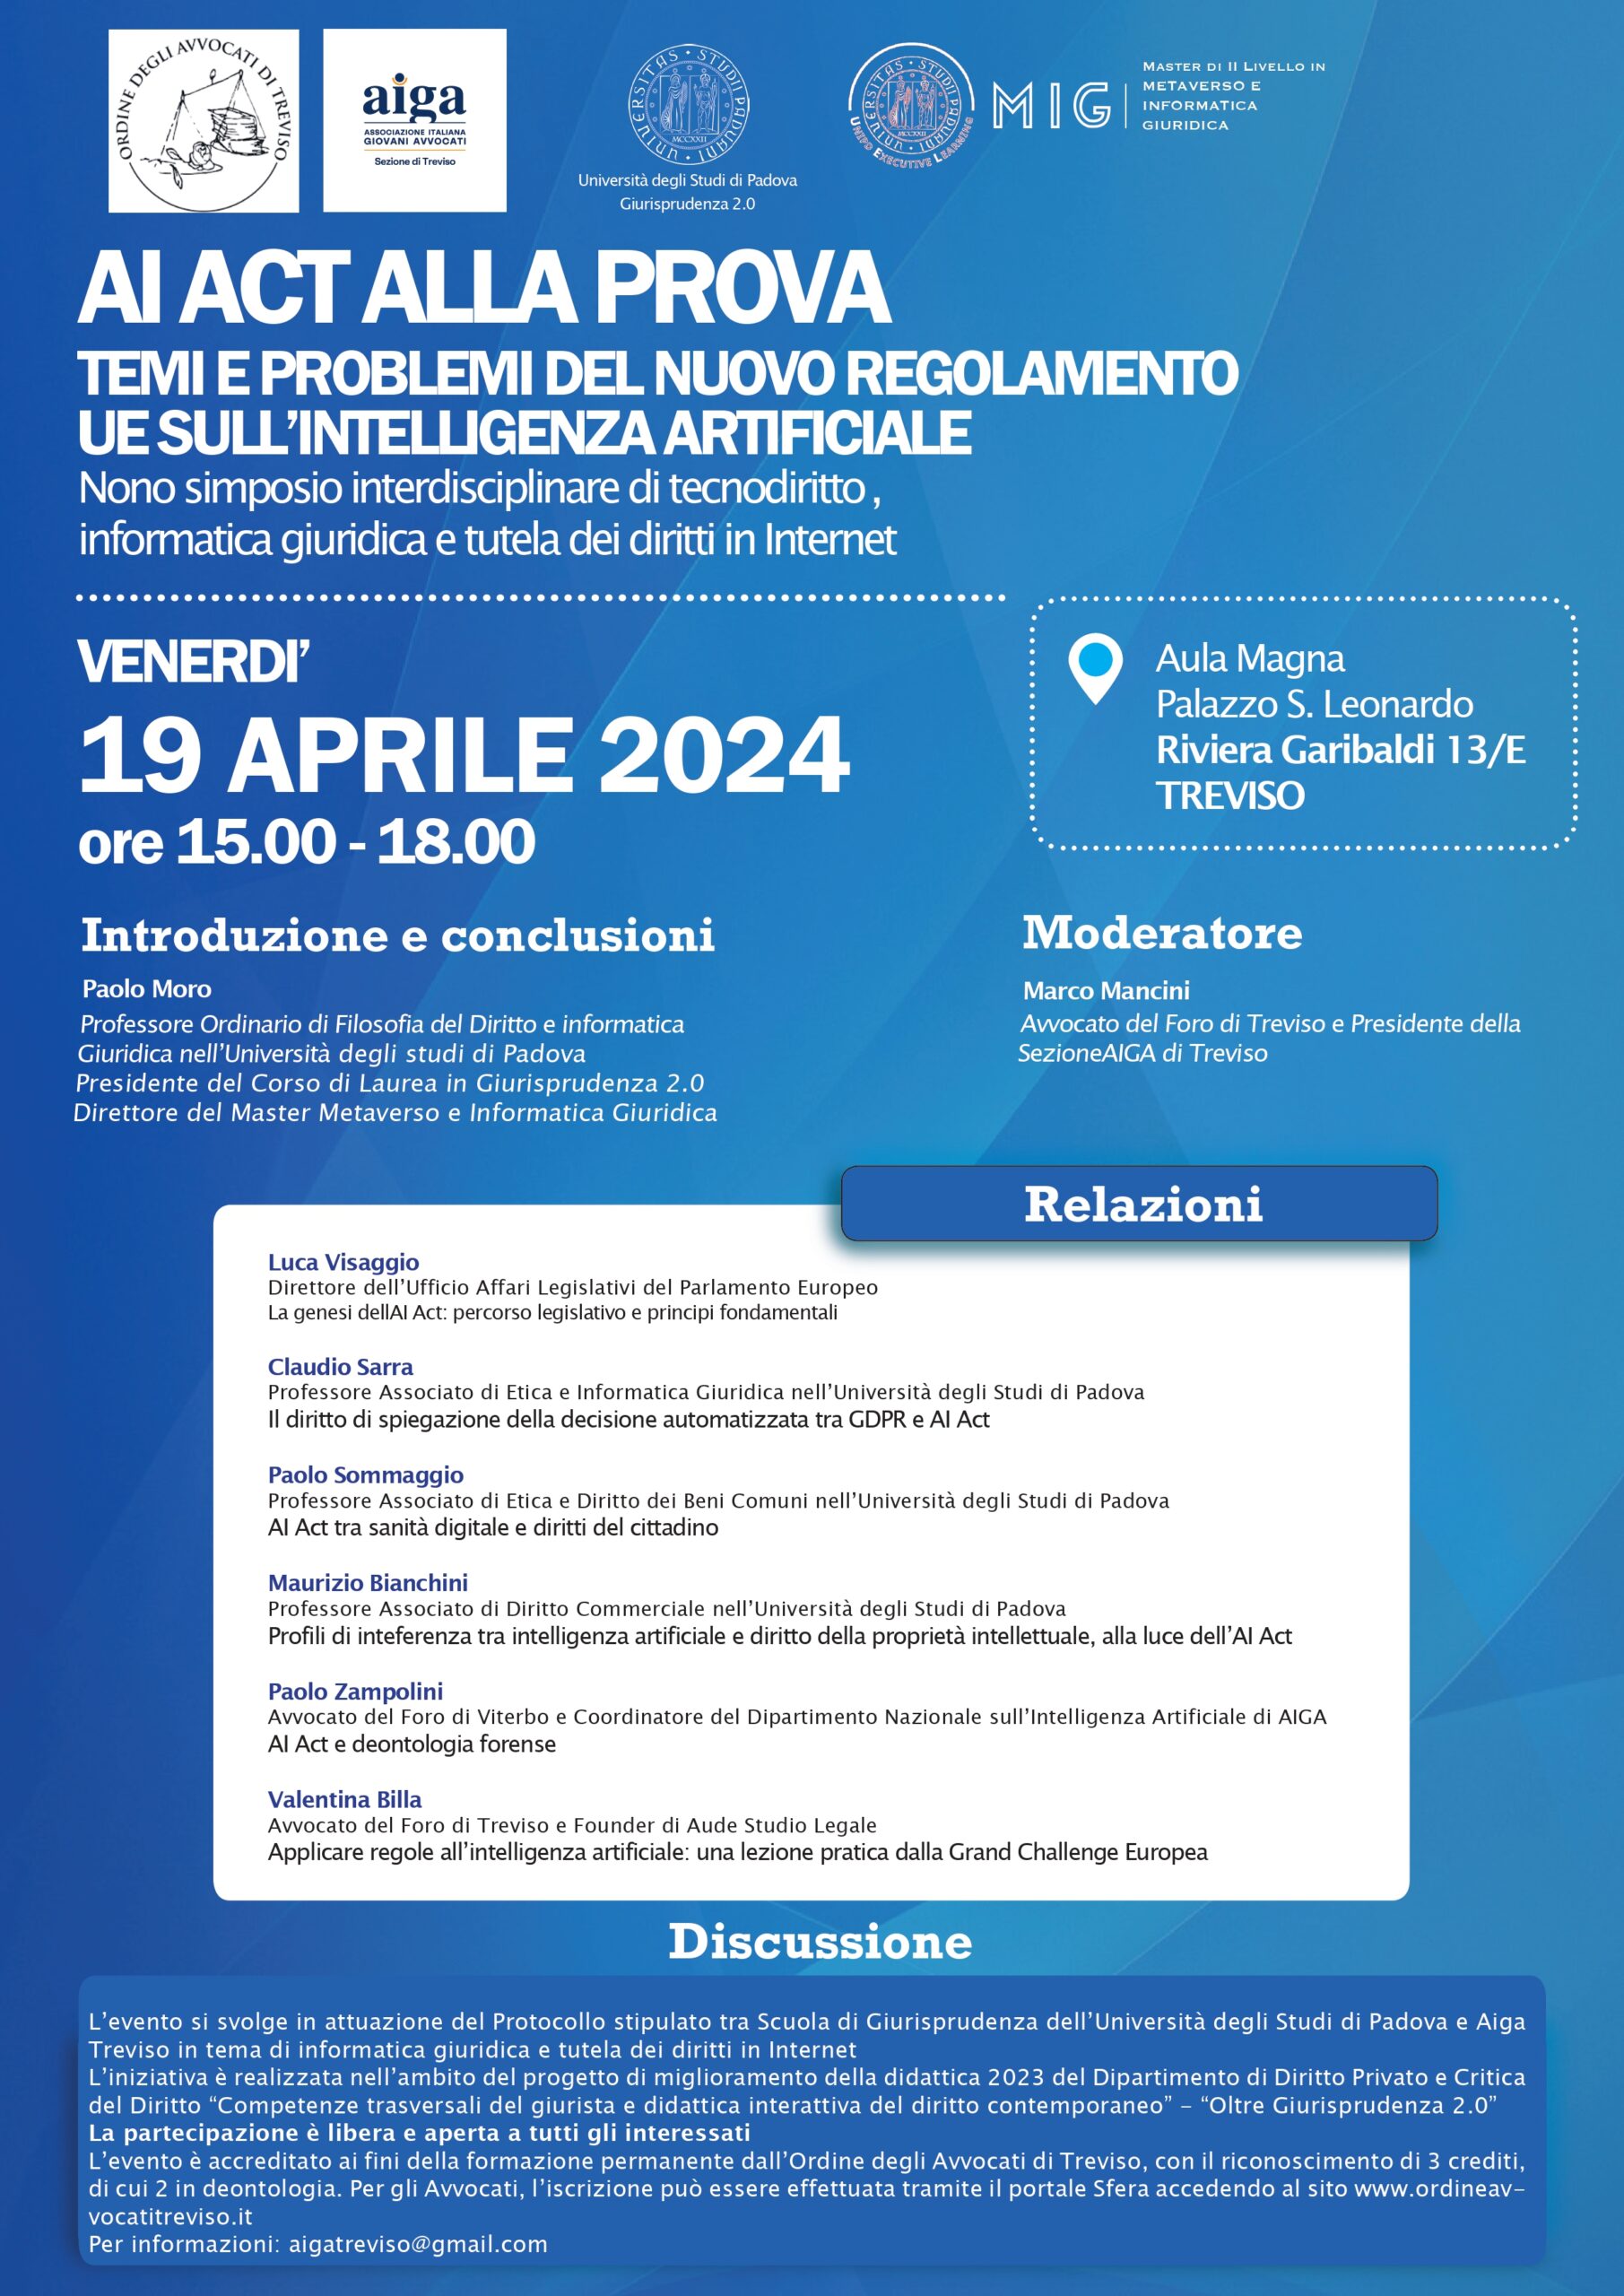 The university programme in law  “Giurisprudenza 2.0” in Treviso, discussing Artificial Intelligence and the AI Act at European level